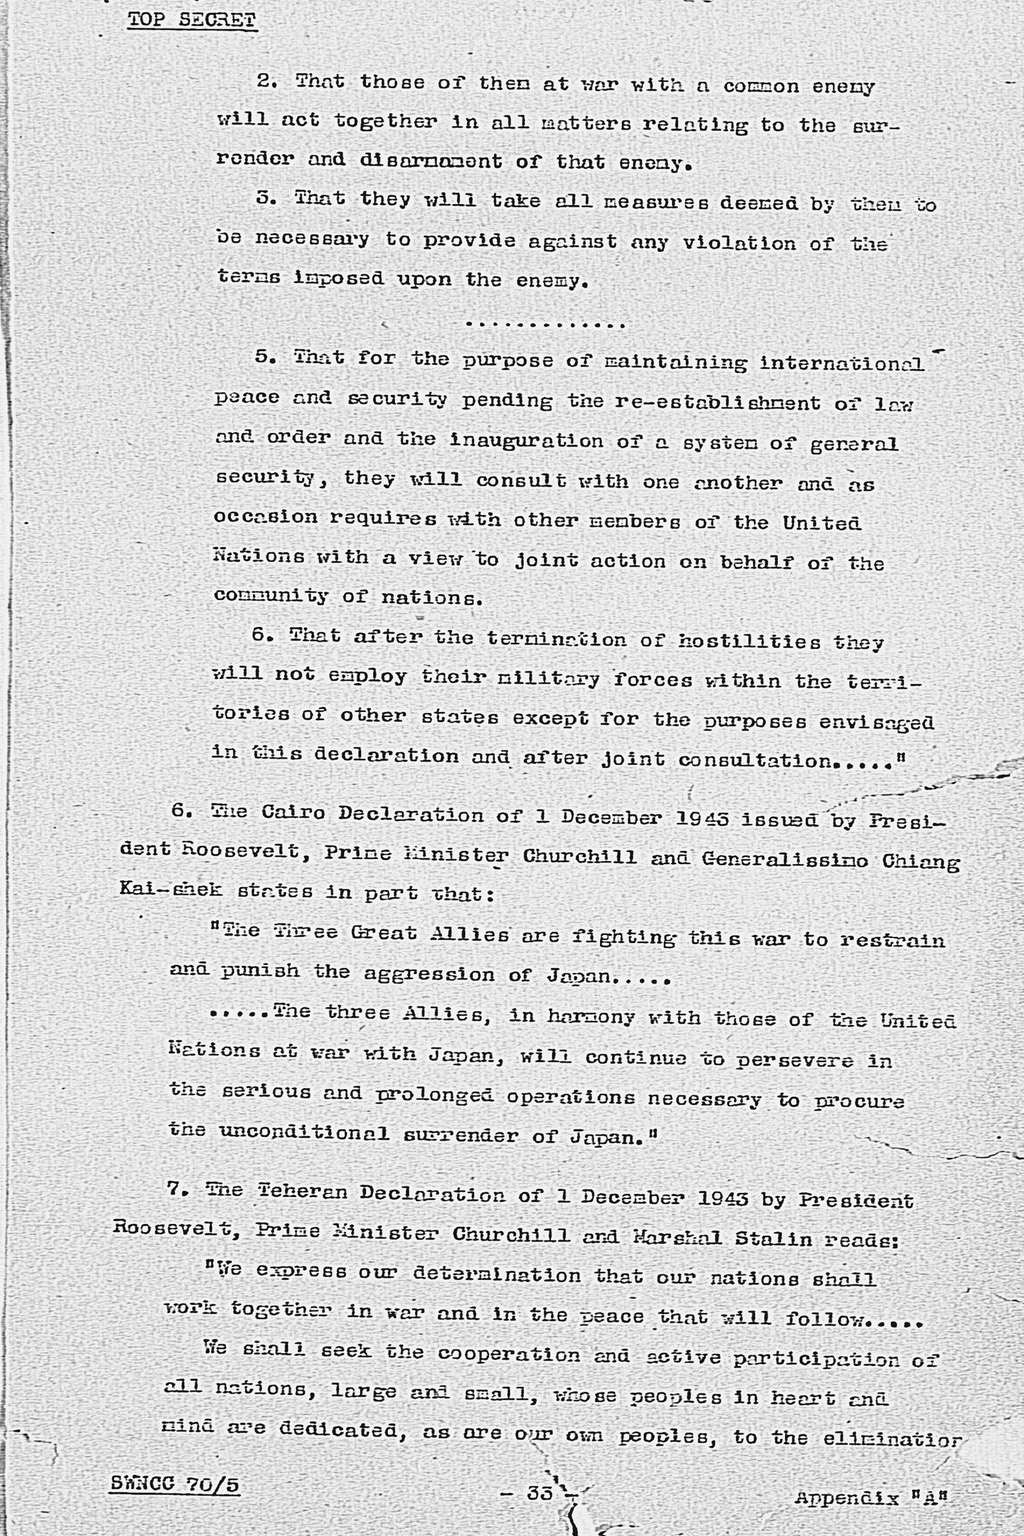 『Memorandum for the President, Subject: National Composition of Forces to Occupy Japan Proper to the Post-Defeat Period』(拡大画像)